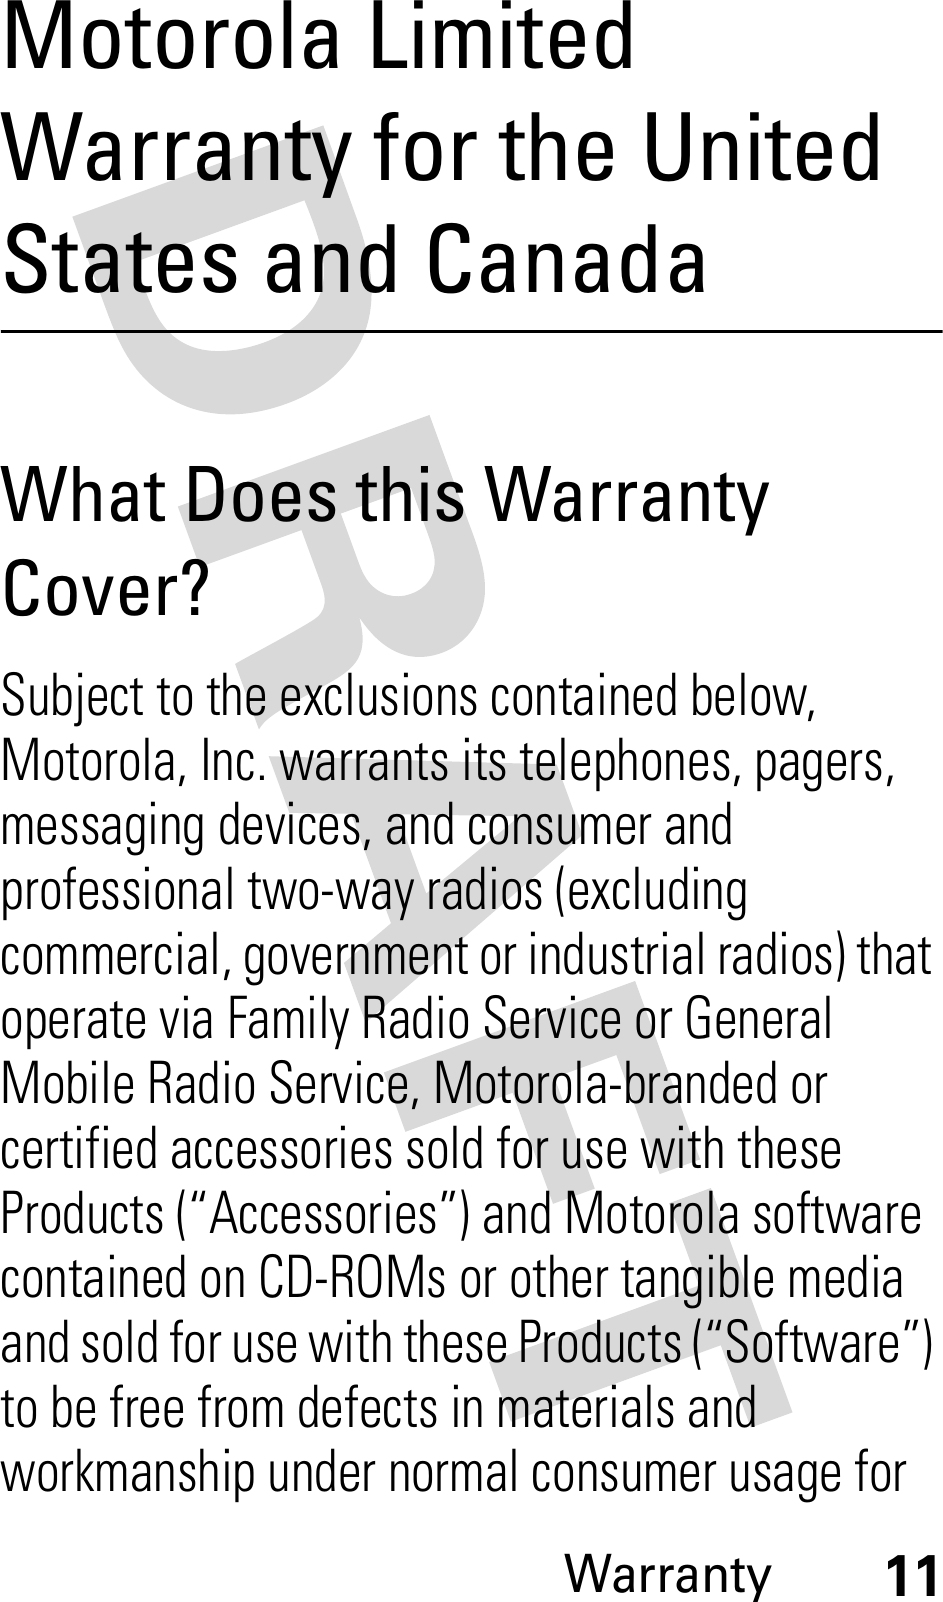 Warranty11Motorola Limited Warranty for the United States and CanadaWarrantyWhat Does this Warranty Cover?Subject to the exclusions contained below, Motorola, Inc. warrants its telephones, pagers, messaging devices, and consumer and professional two-way radios (excluding commercial, government or industrial radios) that operate via Family Radio Service or General Mobile Radio Service, Motorola-branded or certified accessories sold for use with these Products (“Accessories”) and Motorola software contained on CD-ROMs or other tangible media and sold for use with these Products (“Software”) to be free from defects in materials and workmanship under normal consumer usage for 